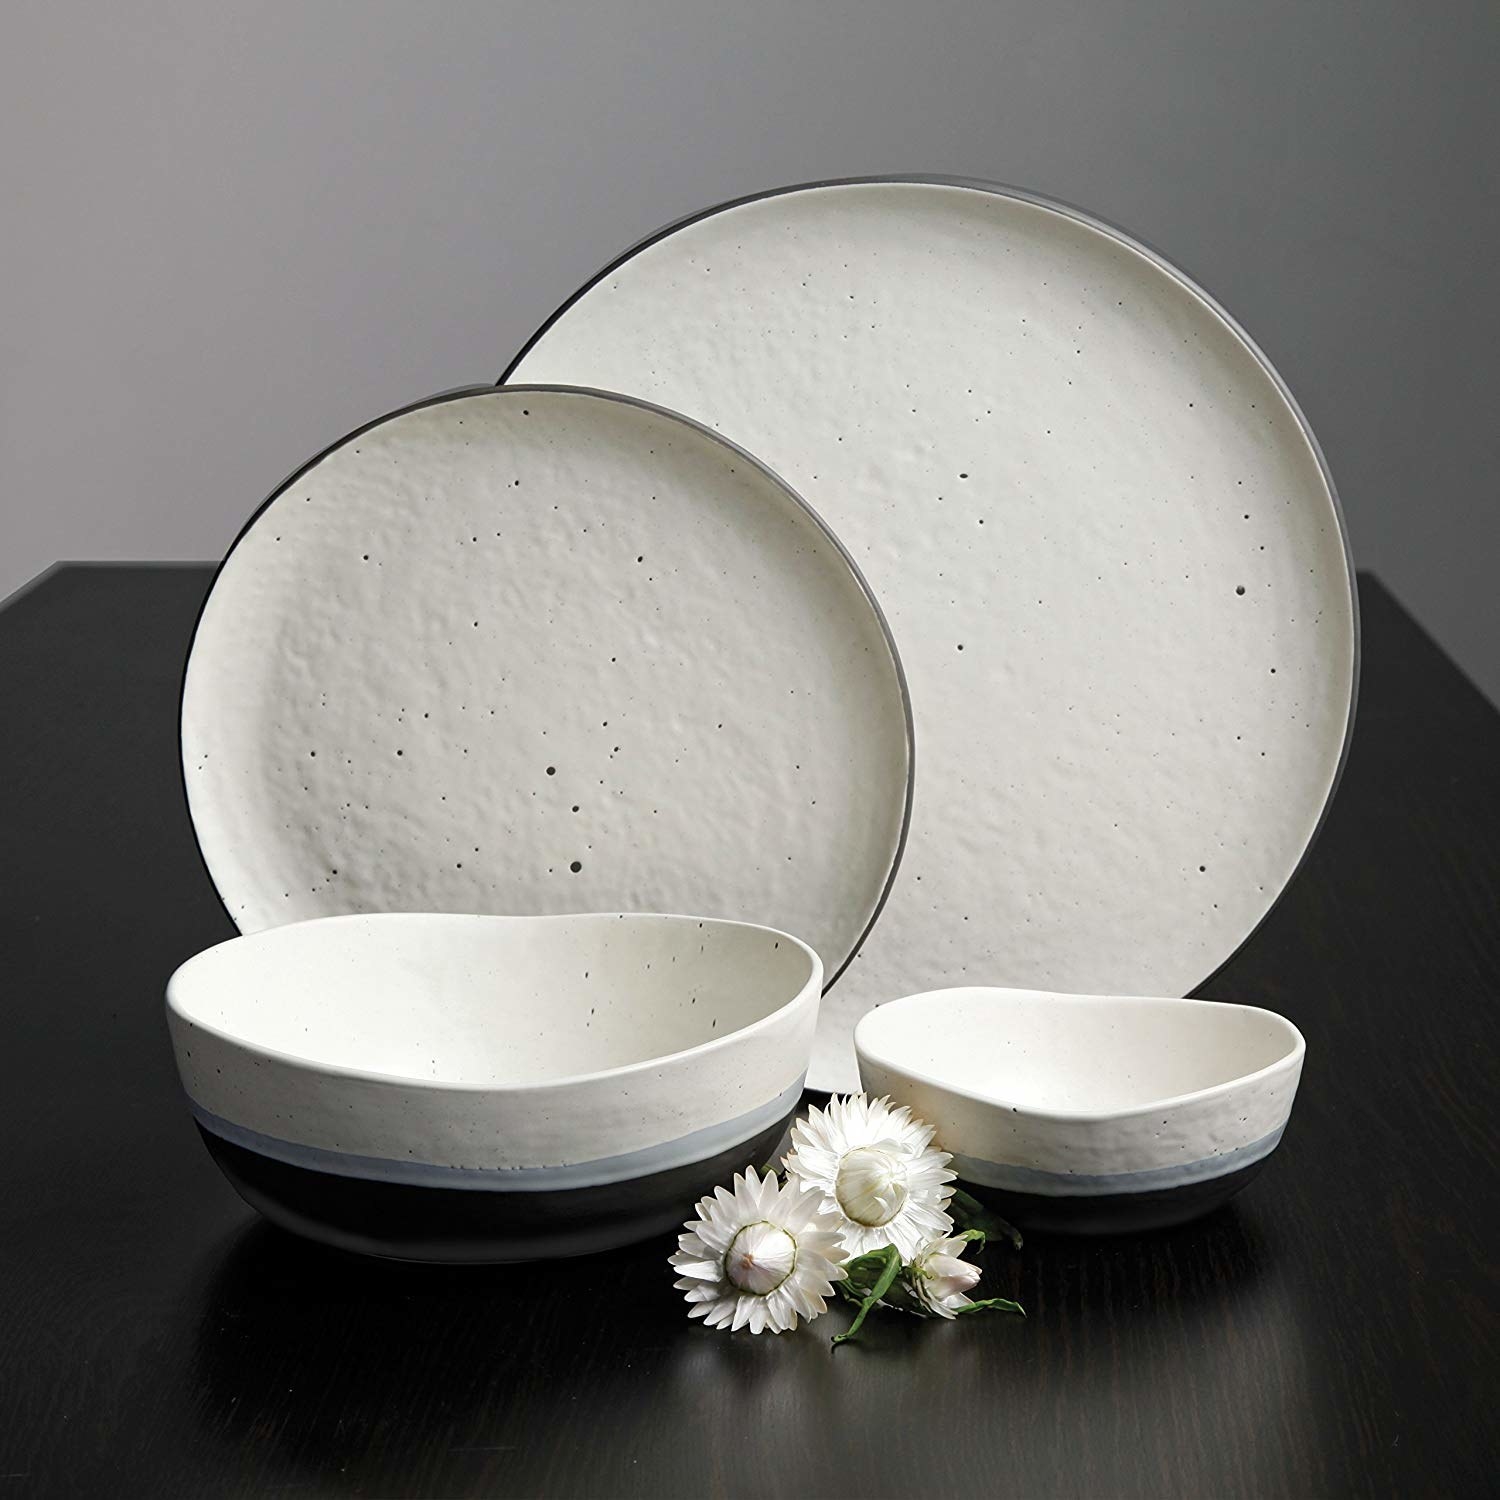 irregularly shaped bowls and plates with speckled pattern